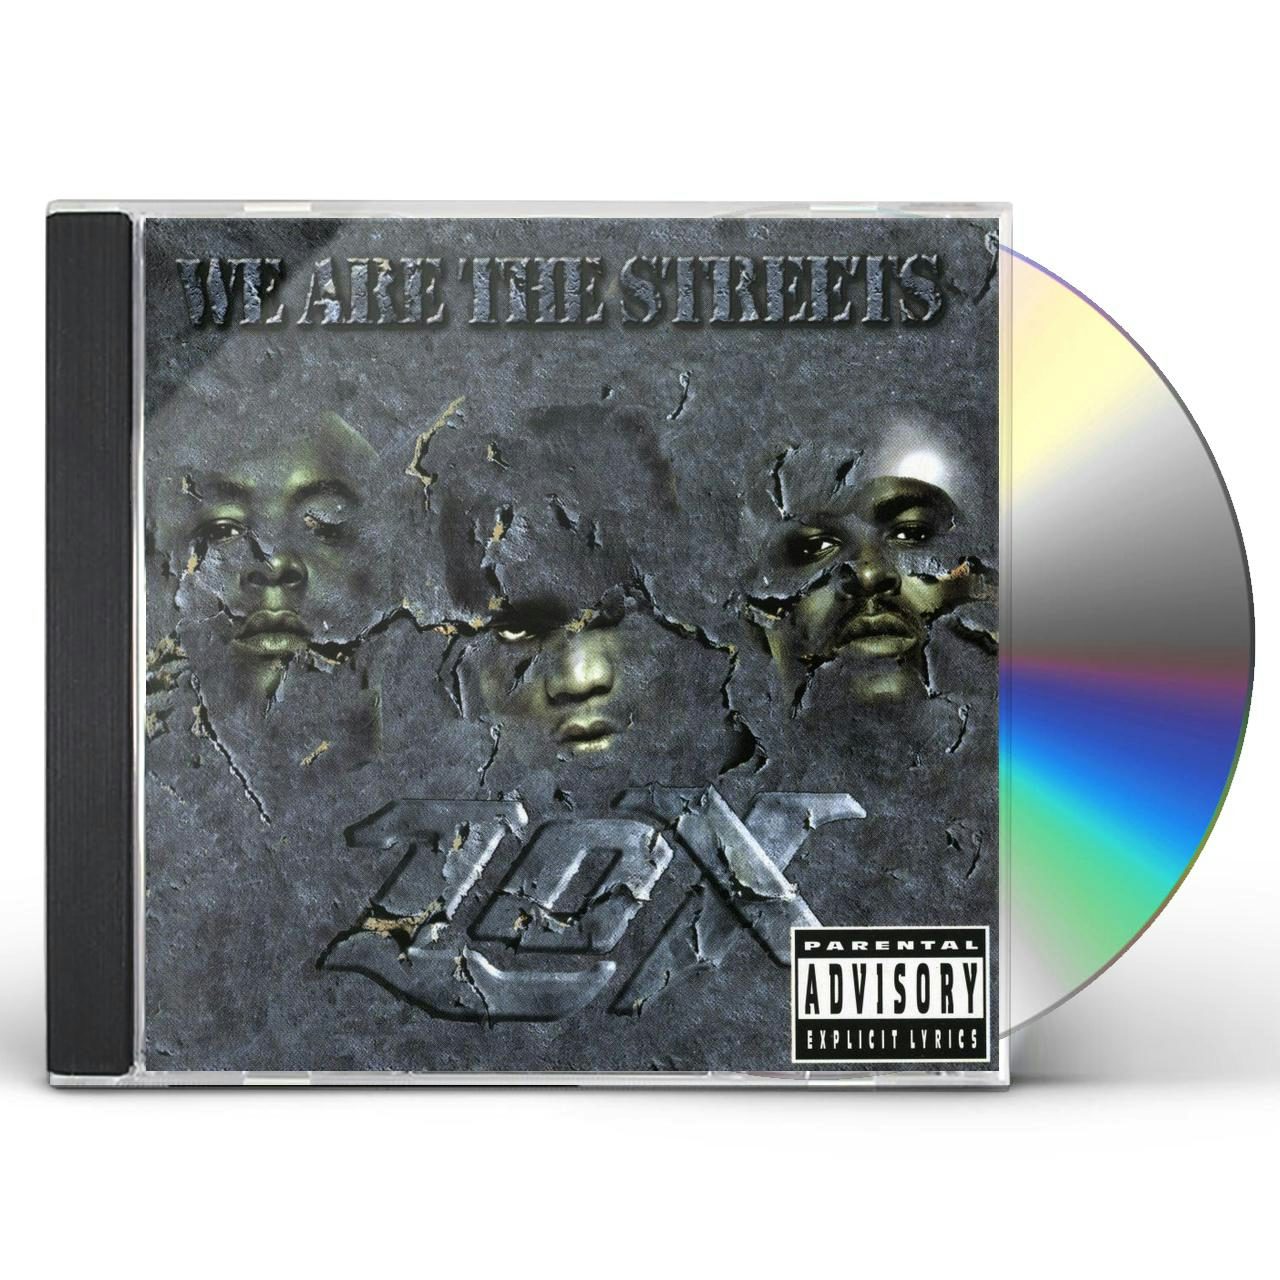 the lox we are the streets download